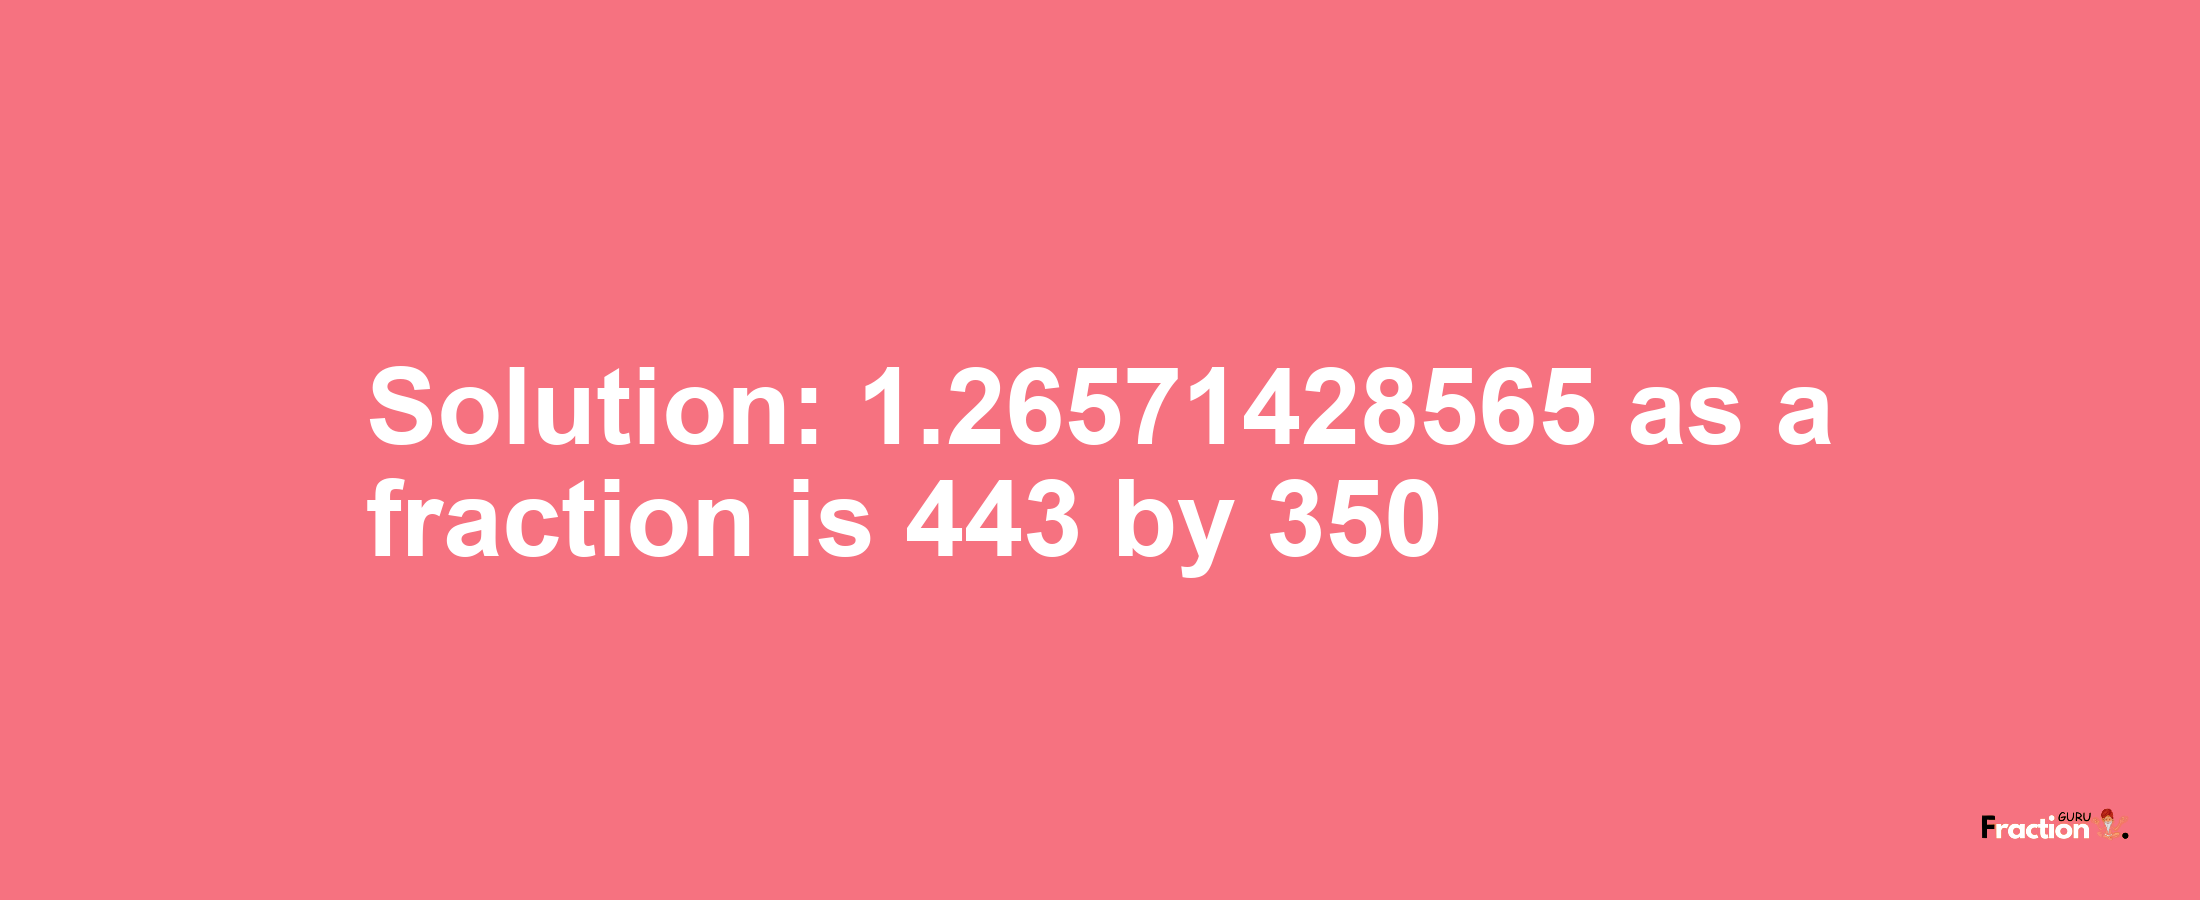 Solution:1.26571428565 as a fraction is 443/350